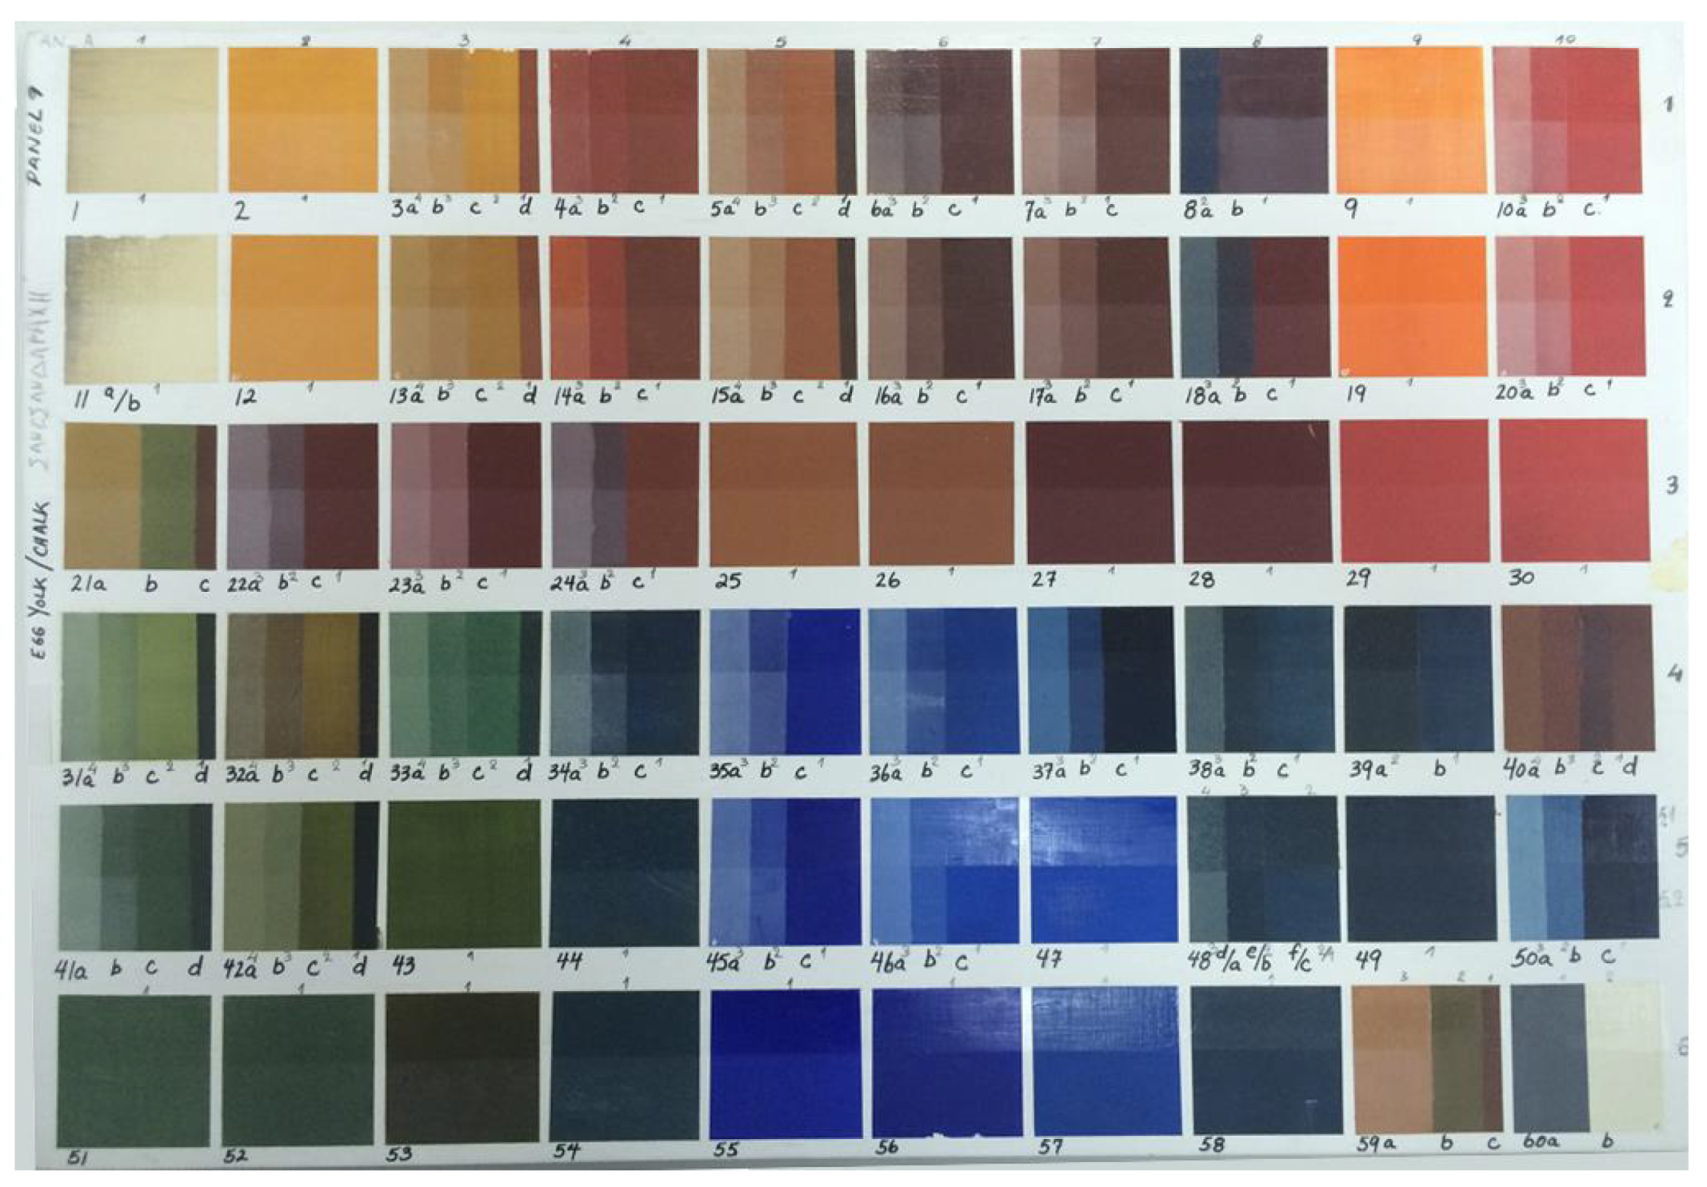 Gallery Glass Class: Color Charts--Dry Color Swatches and Pattern